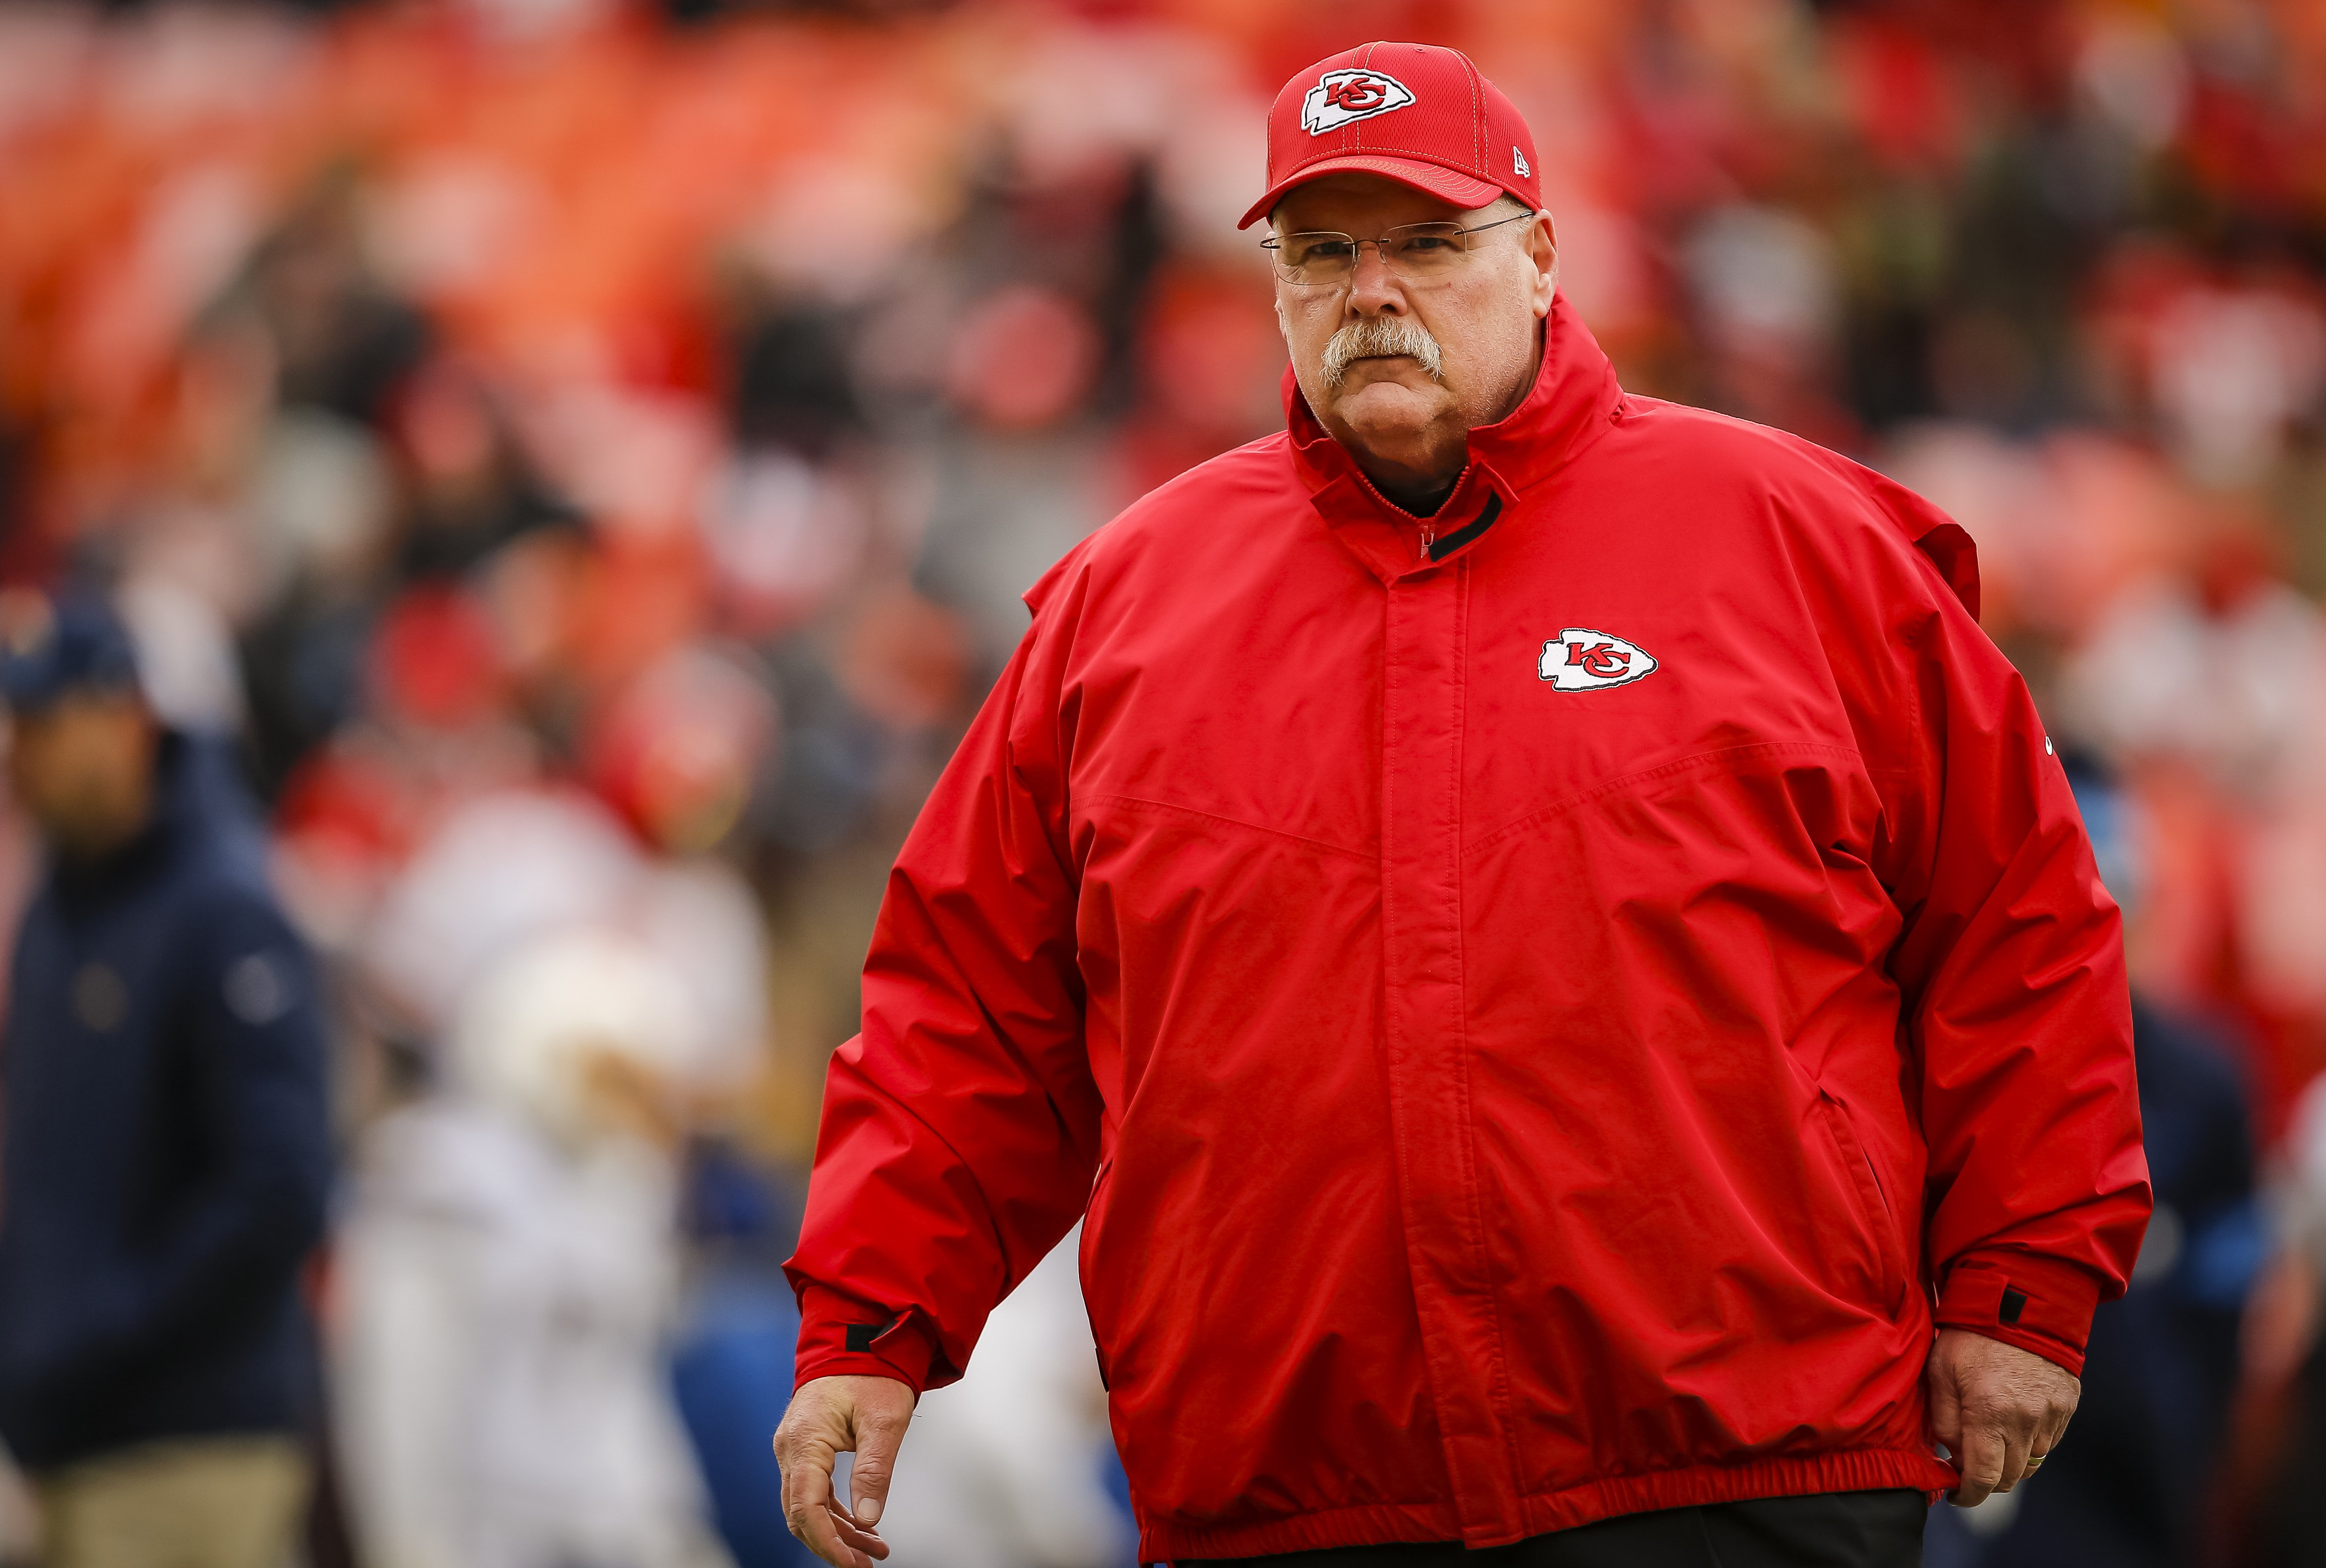 Andy Reid walks the football field during pregame warmups prior to the game against the Los Angeles Chargers at Arrowhead Stadium on December 29, 2019 in Kansas City, Missouri | Photo: Getty Images